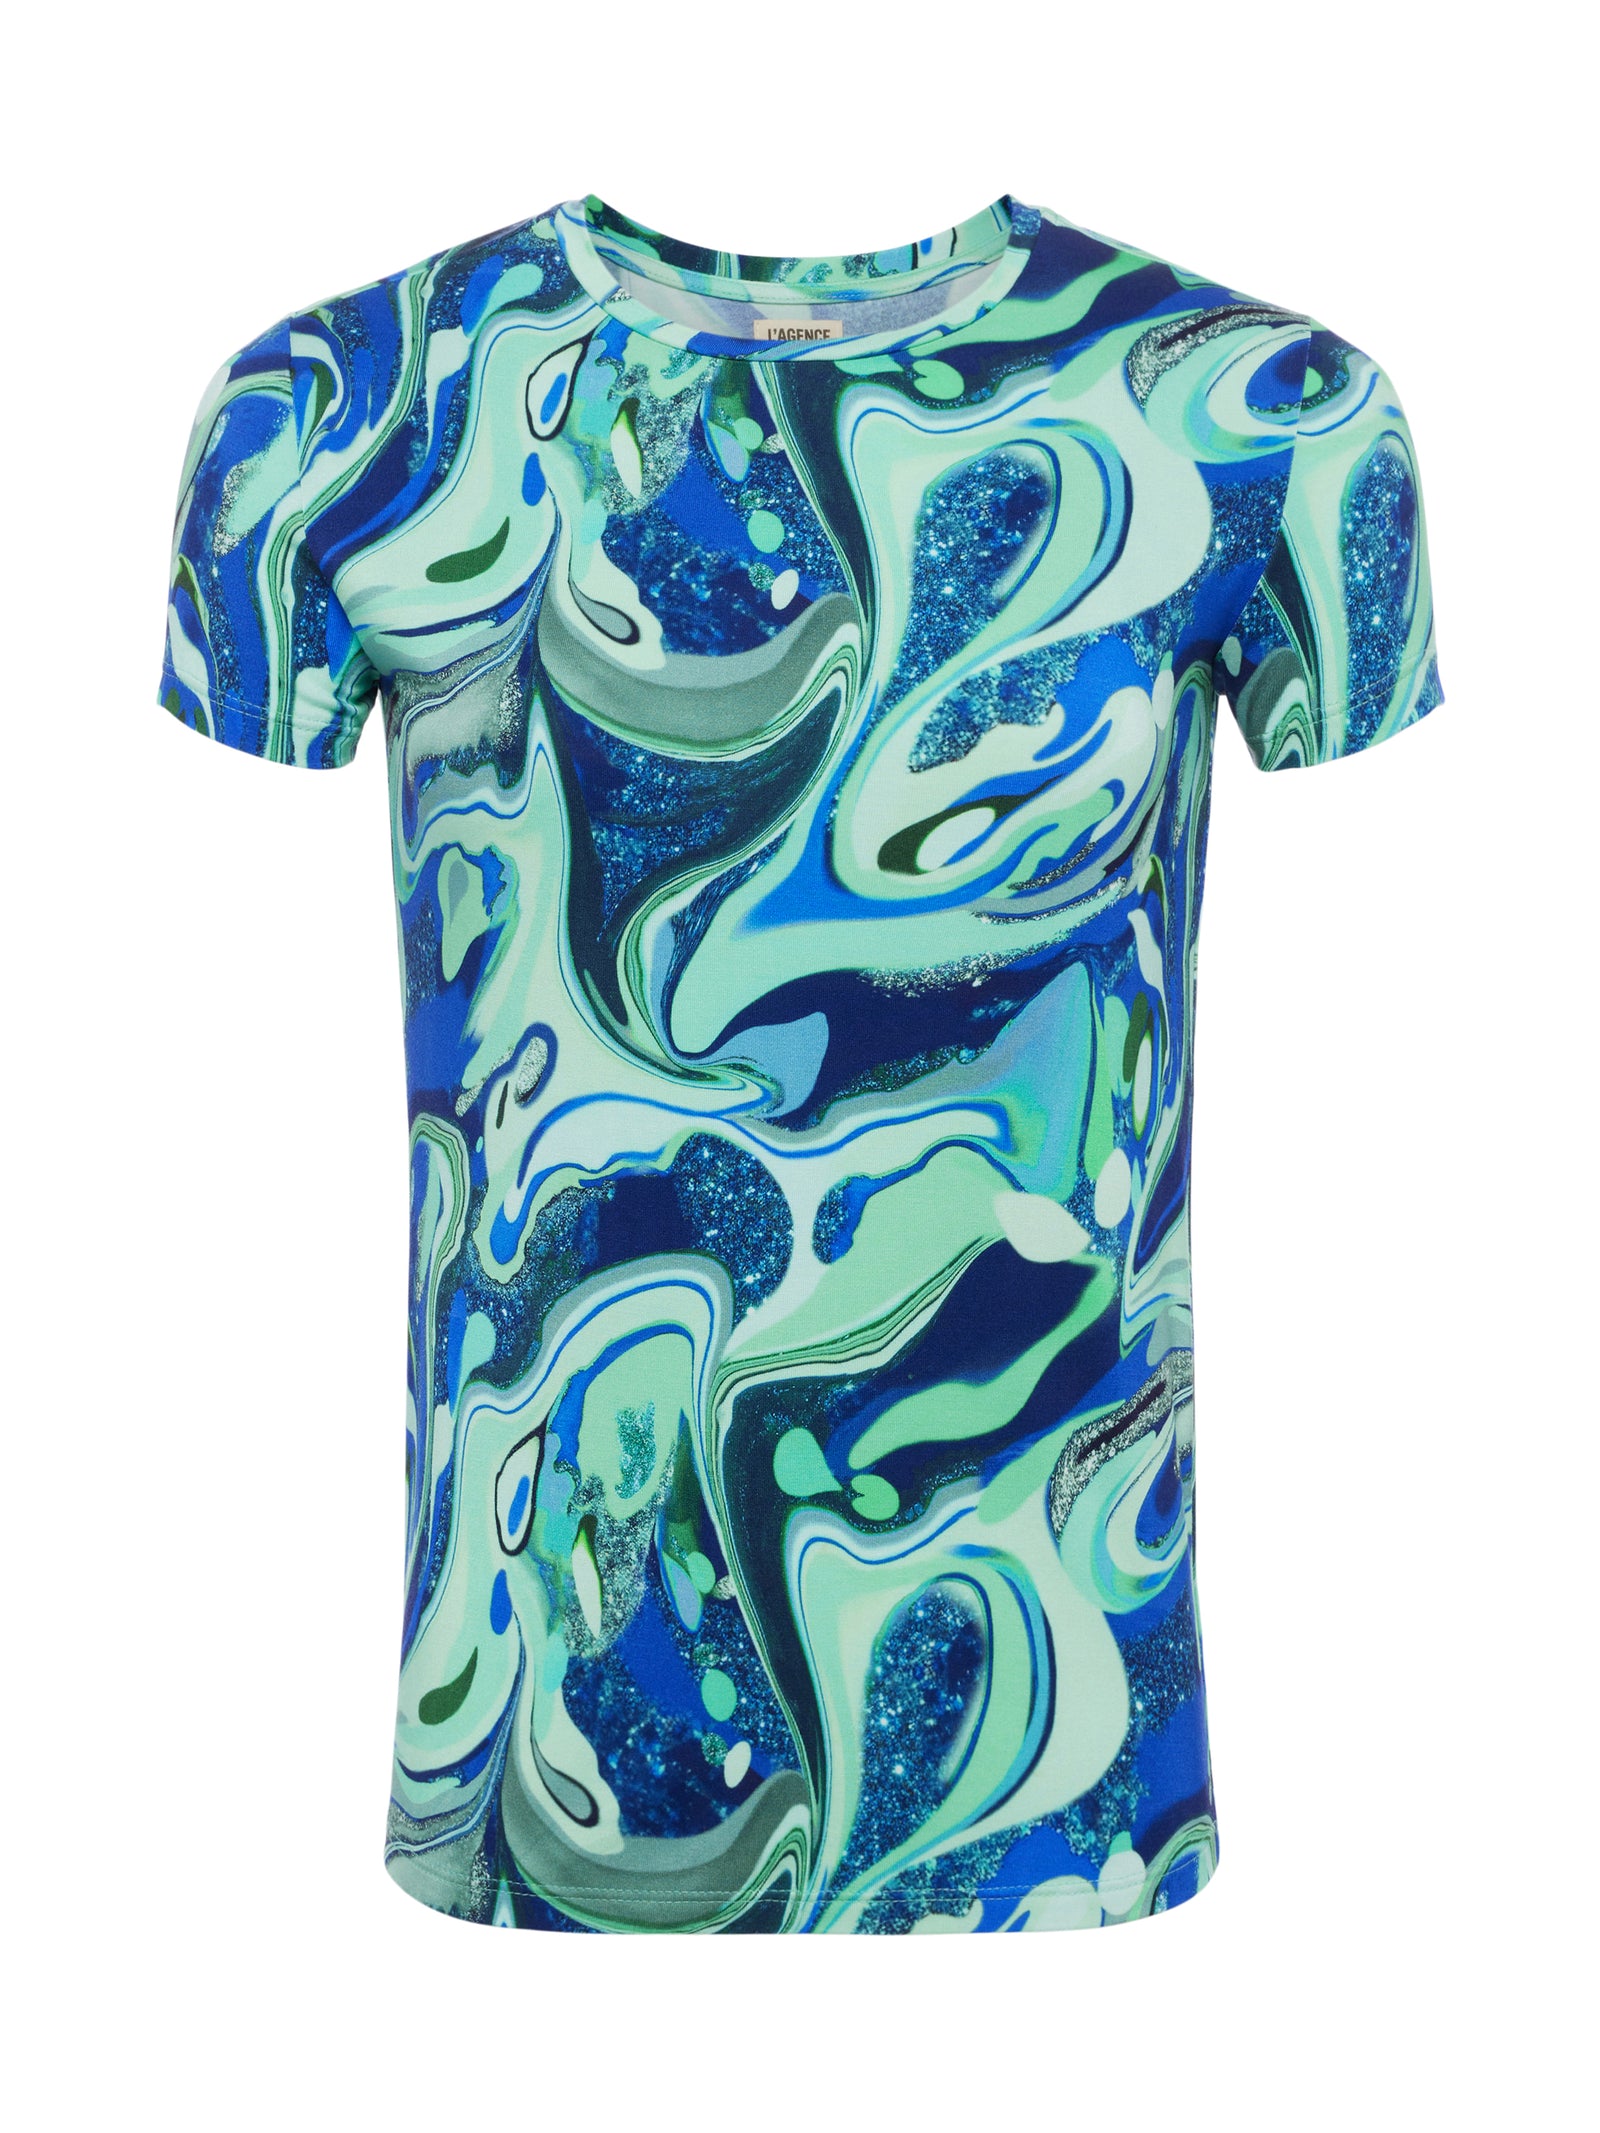 L'AGENCE - Ressi Fitted Crewneck Tee in Mint Multi Tie Dye Swirl